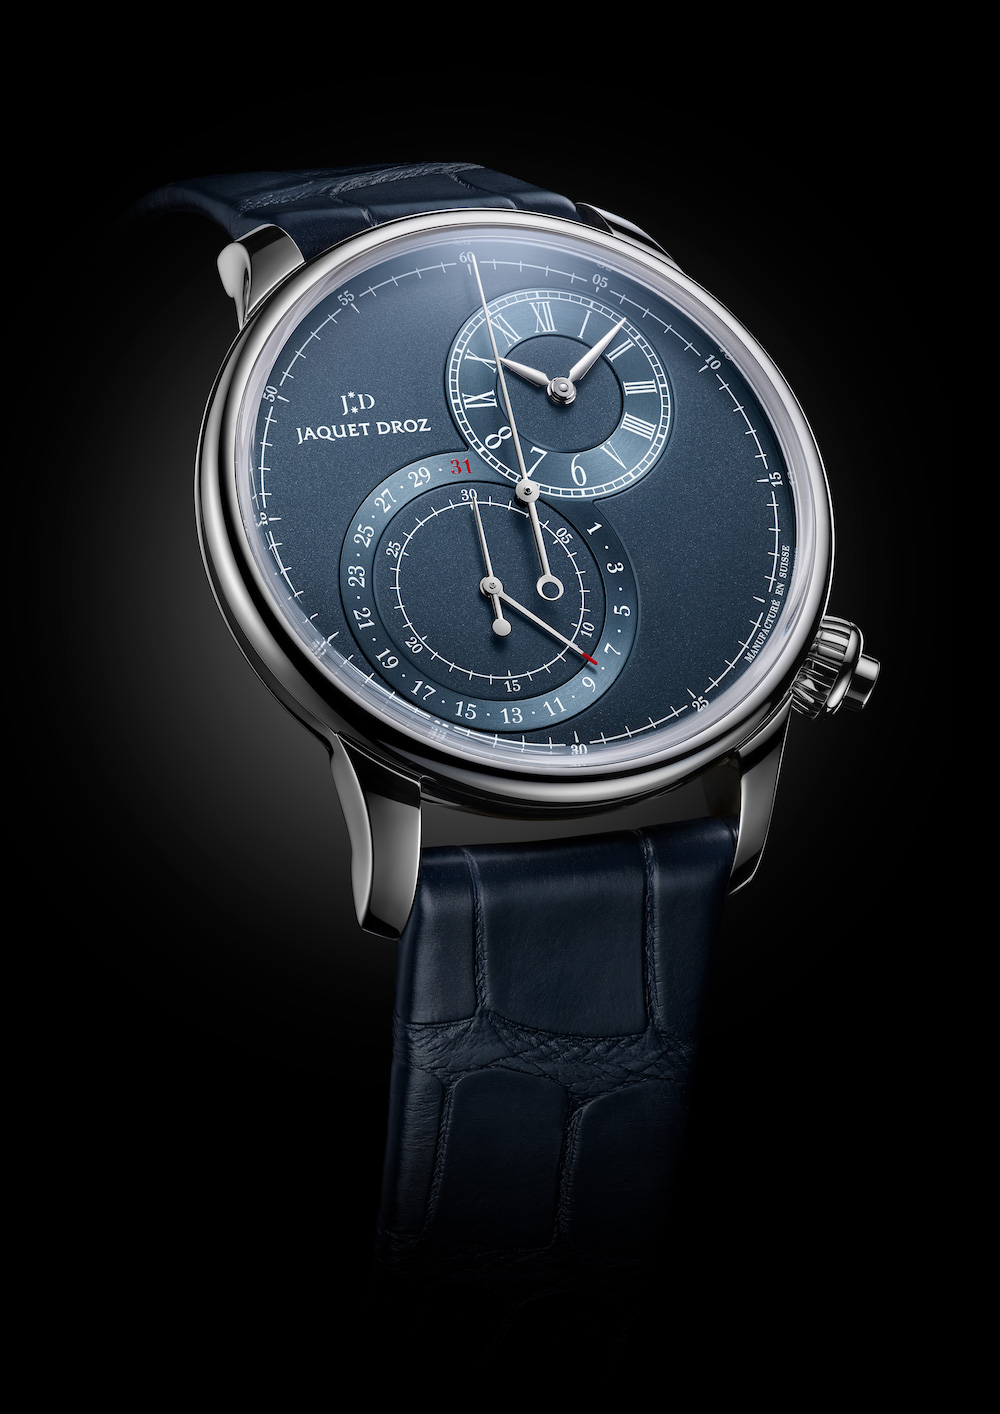 Jaquet Droz Grande Seconde Off-Centered Chronograph: Timing With A Twist